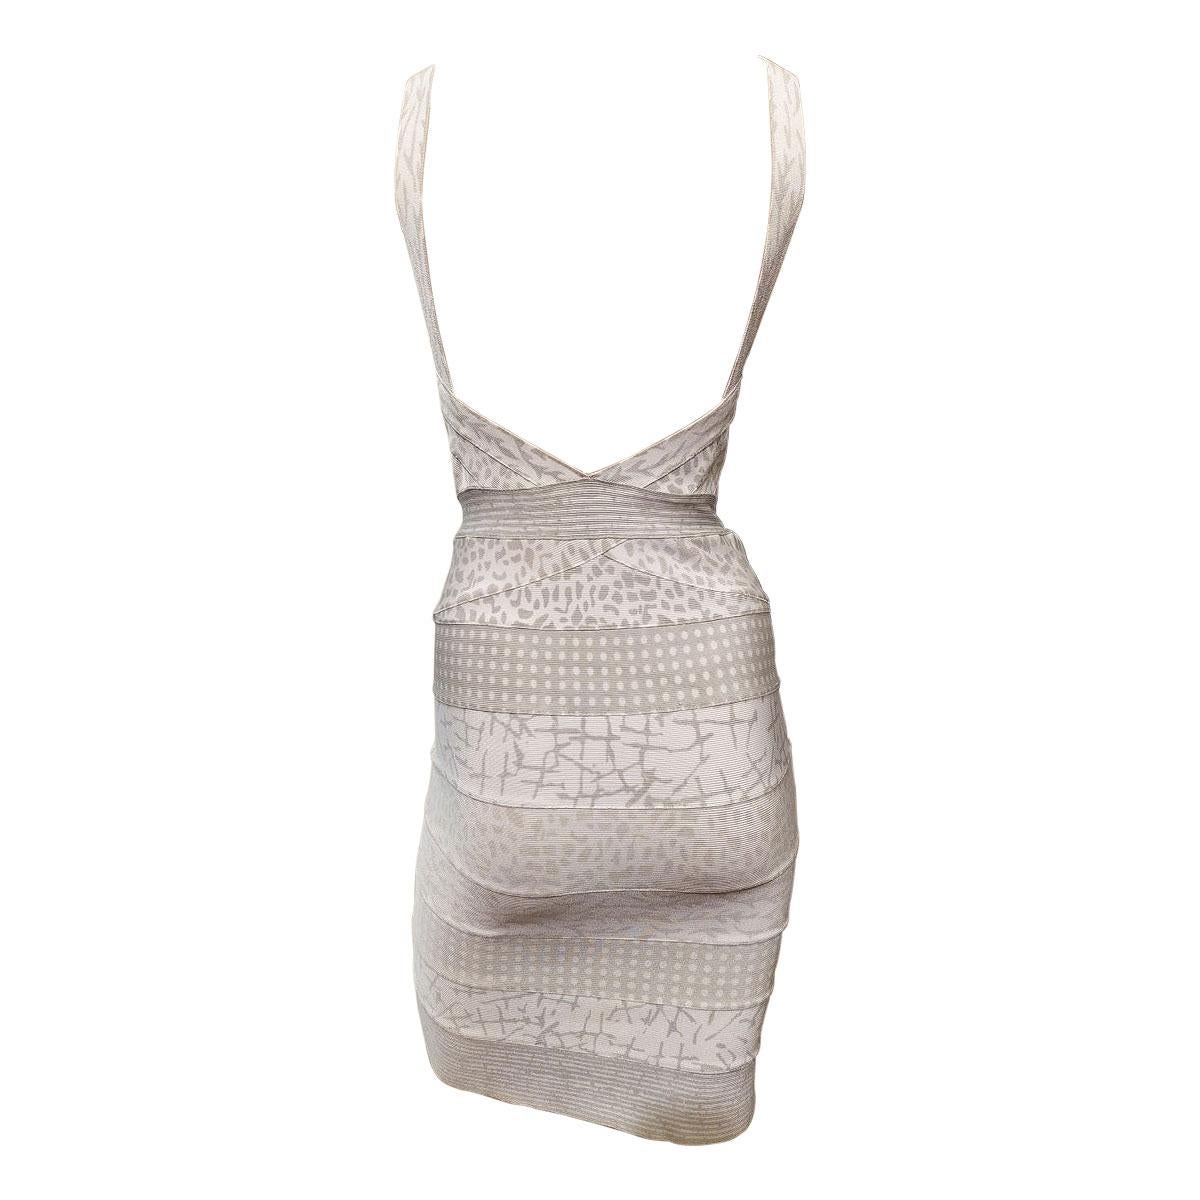 Iconic and very beautiful Herve Leger dress
Rayon (90%) Nylon
Stretch 
Grey fancy color
Zip on the front and neckline on the back
Sleeveless
Total length cm 85 (33,46 inches)
Total length cm 97 (38,18 inches)
Worldwide express shipping included in